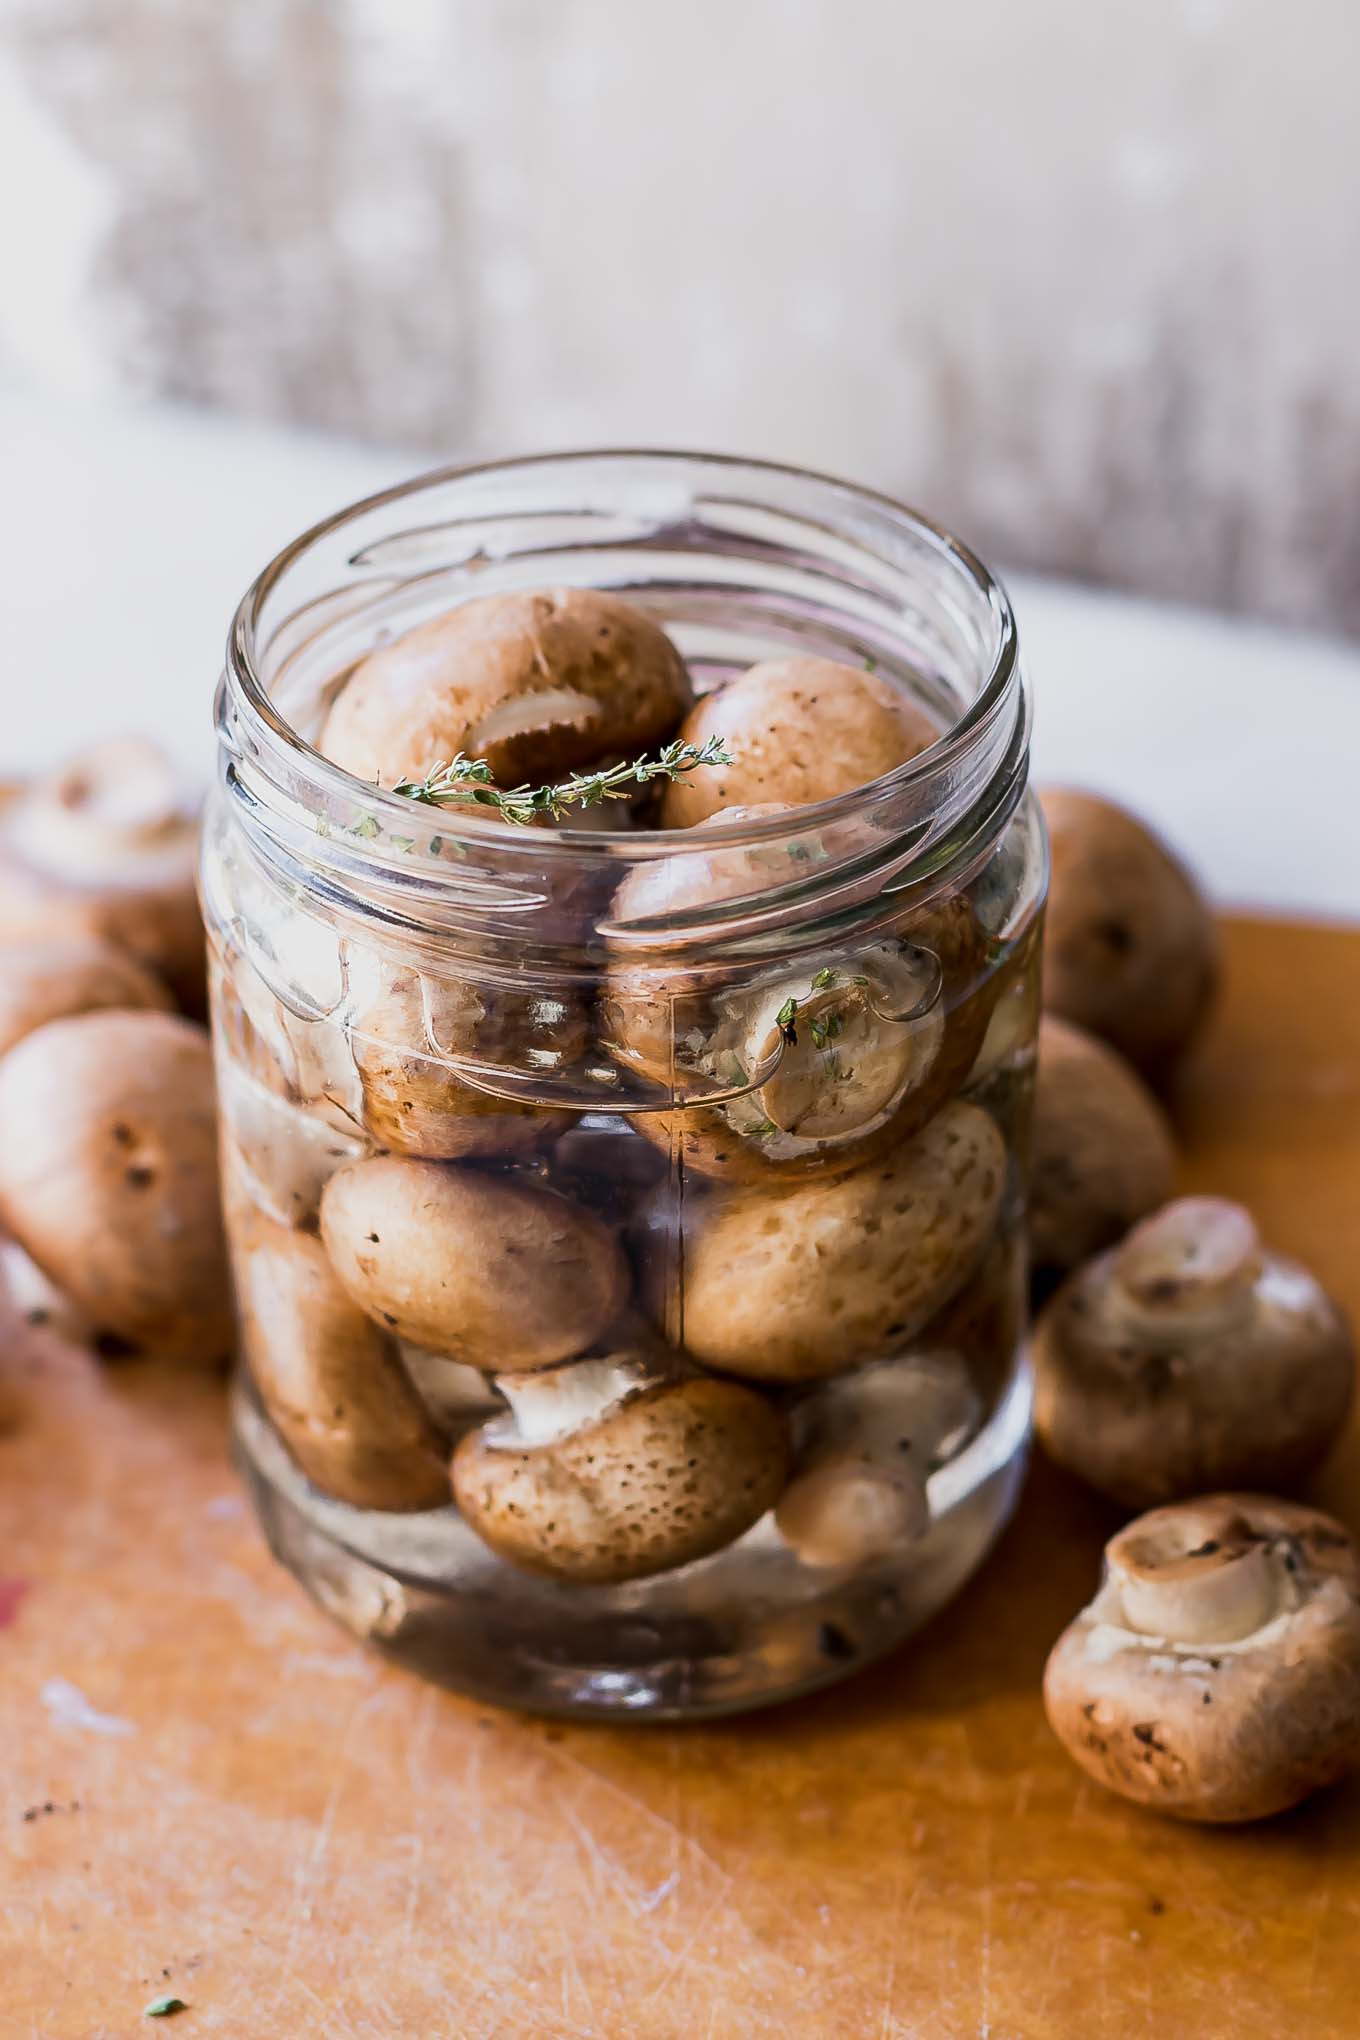 pickled mushrooms in a jar on a wood table